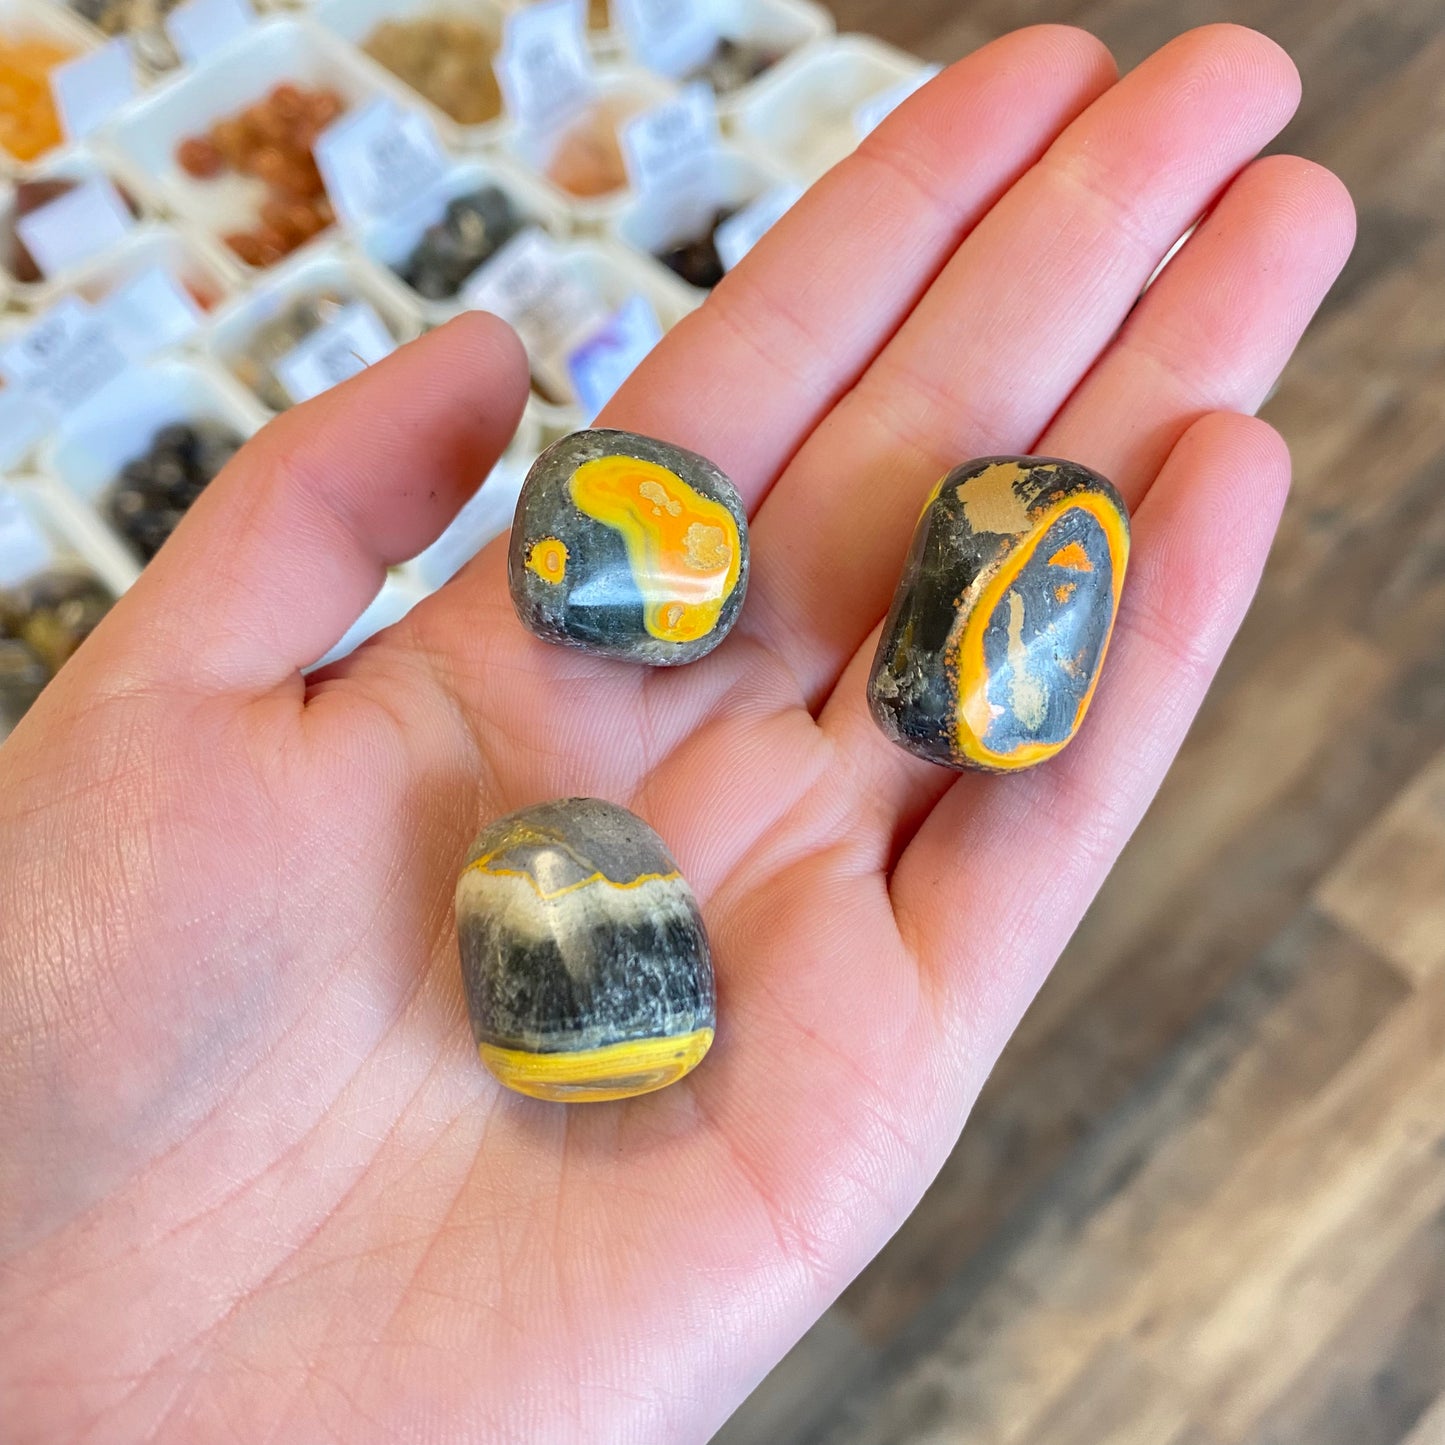 Bumble Bee Jasper (Empowerment and Self-Confidence) Tumbled